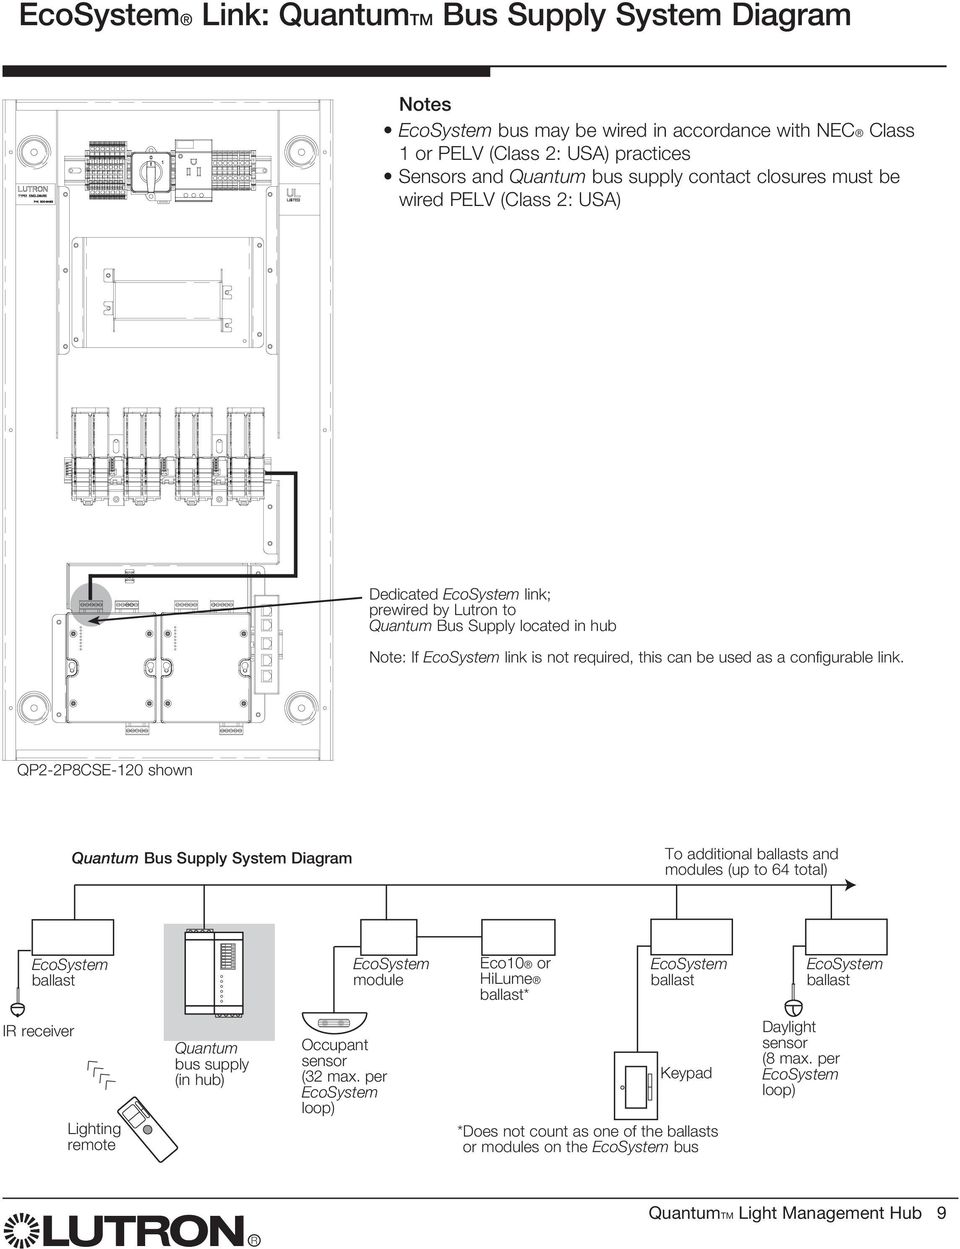 QP2-2P8CSE-120 shown Bus Supply System Diagram To additional ballasts and modules (up to 64 total) ballast 1 2 3 4 5 6 7 8 module Eco10 or HiLume ballast* ballast ballast I